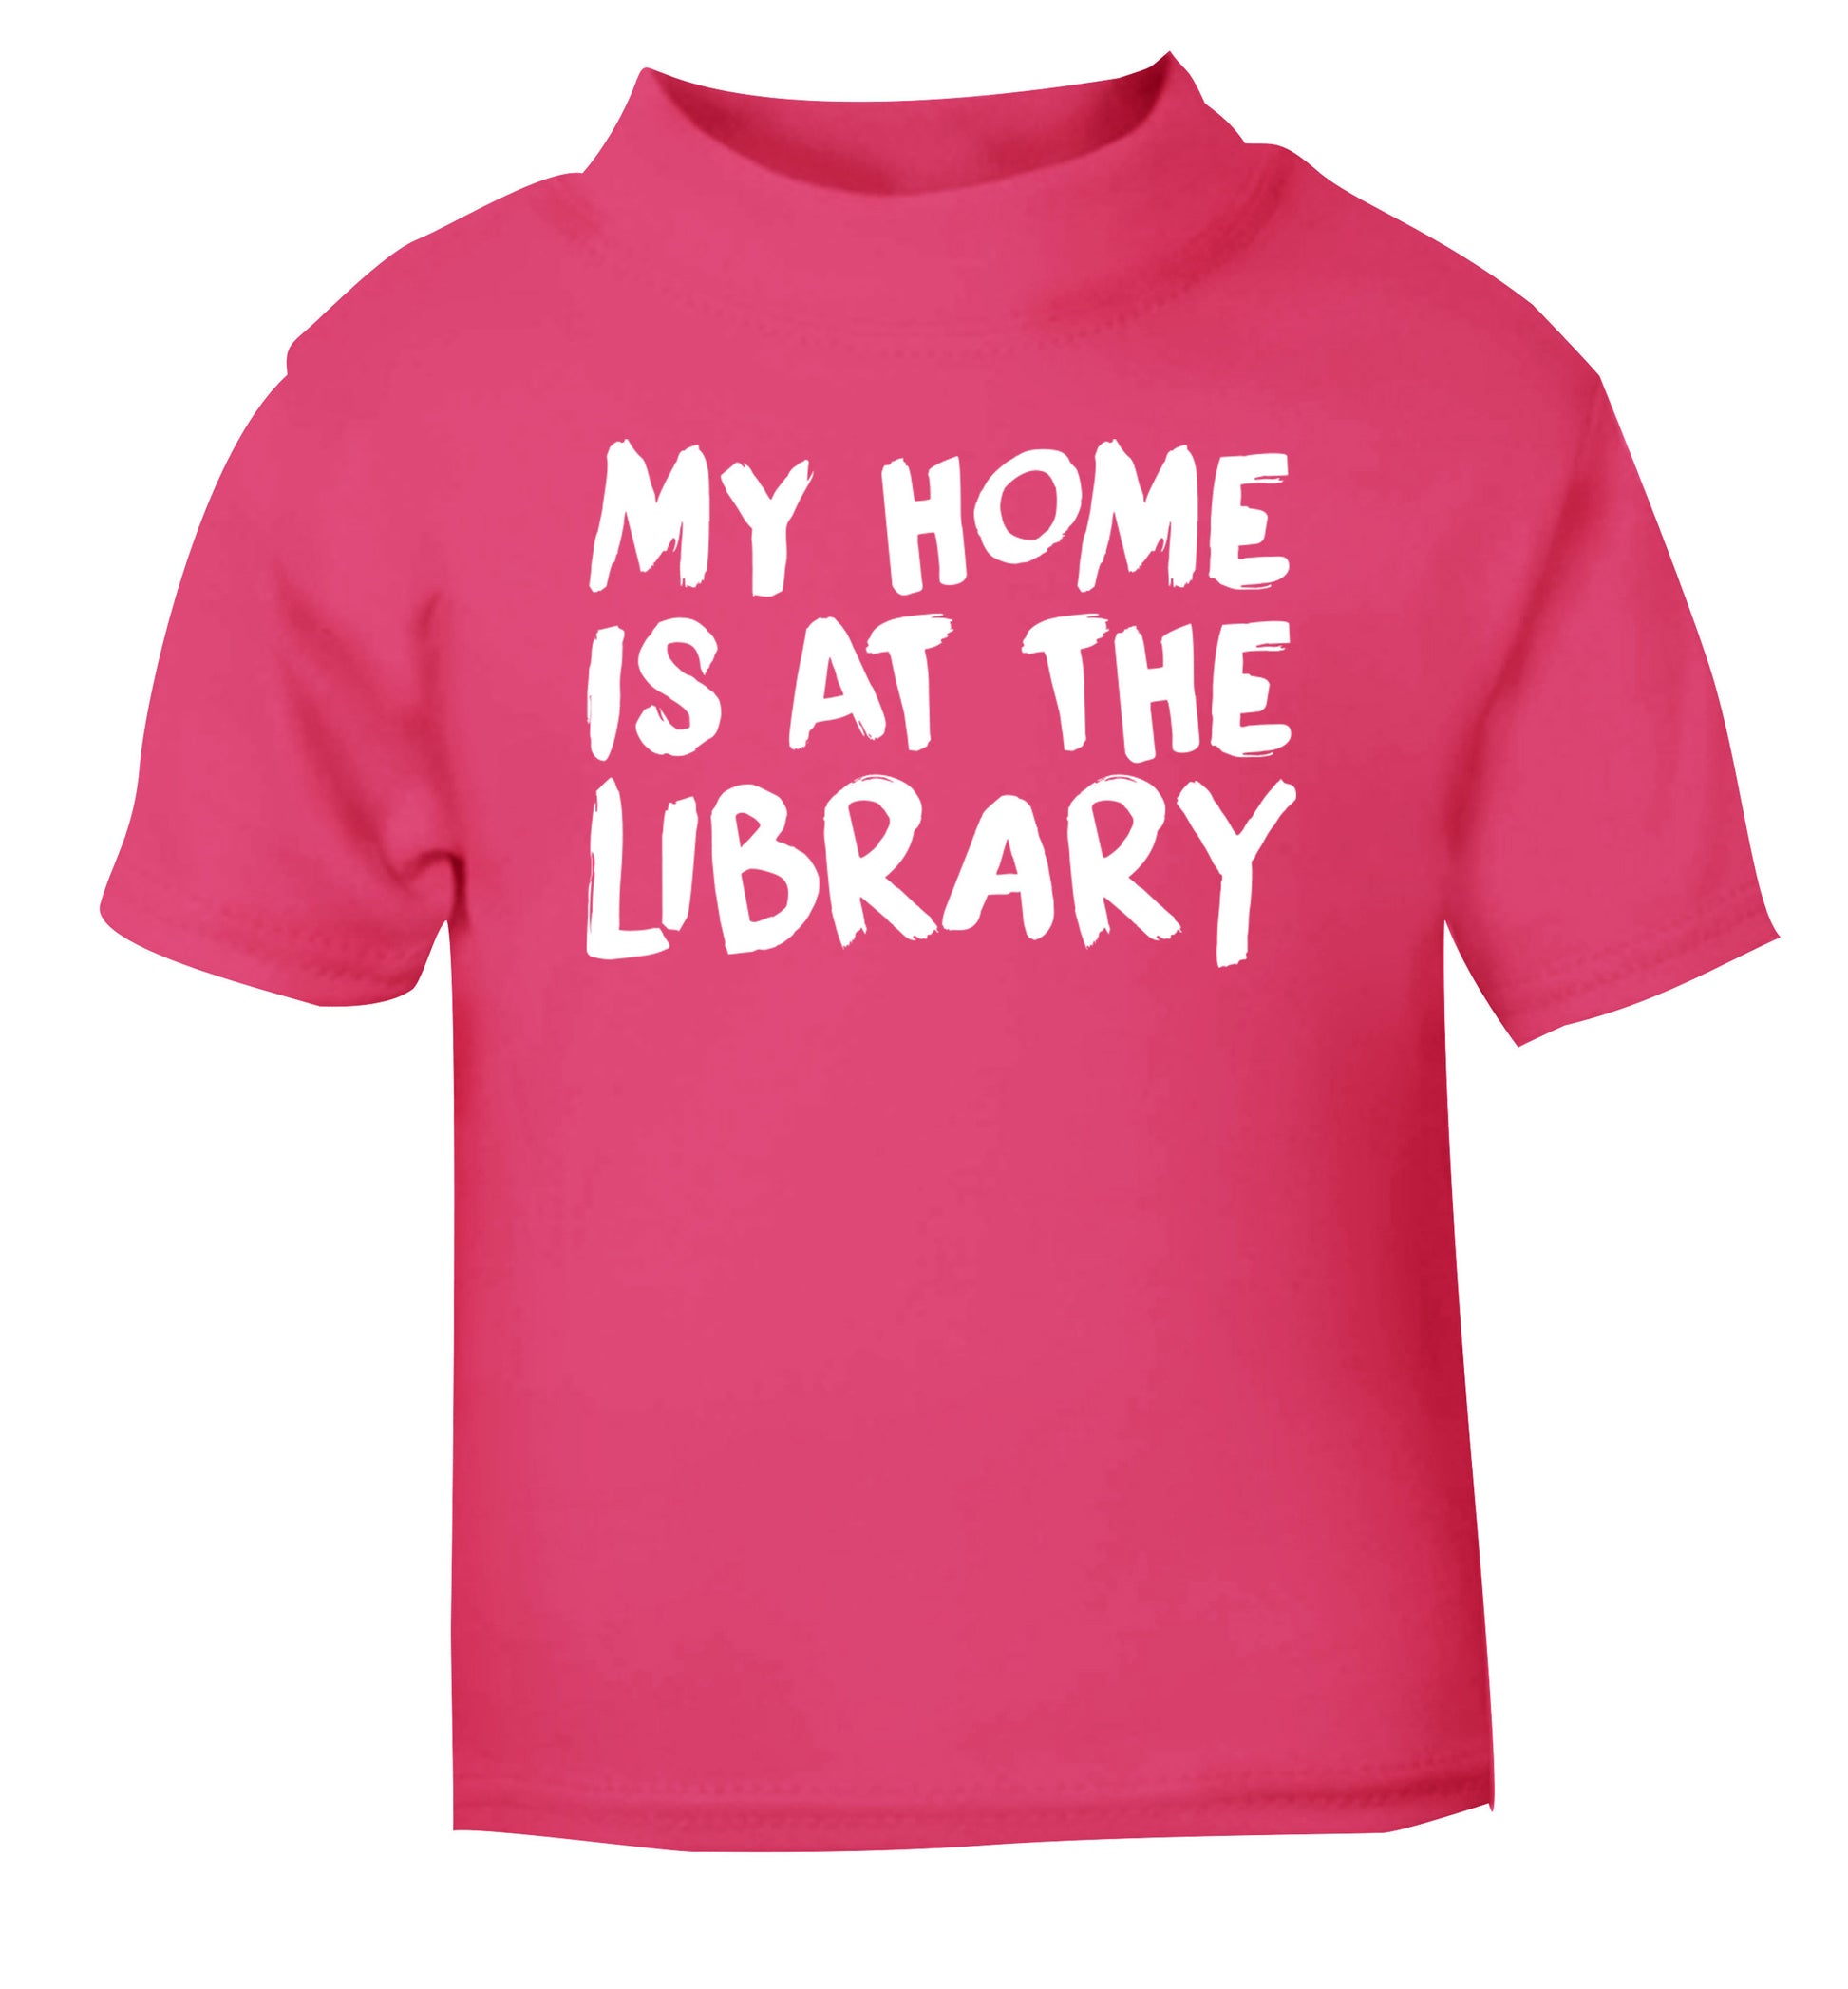 My home is at the library pink Baby Toddler Tshirt 2 Years